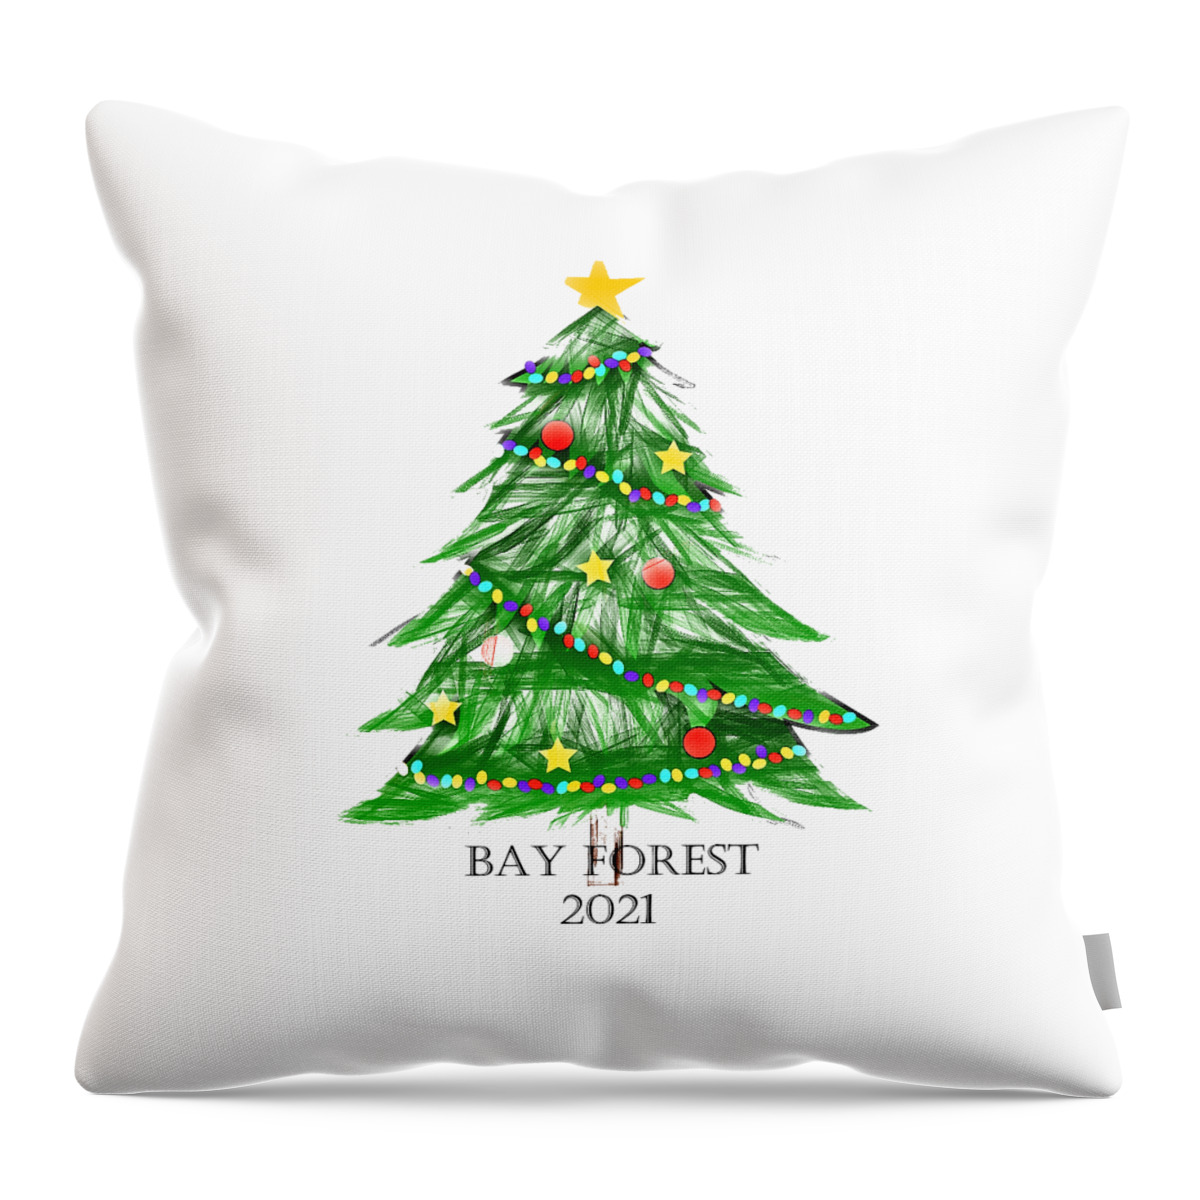 Bay Forest Christmas Throw Pillow featuring the digital art Bay Forest Christmas 2021 by Tom Sachse